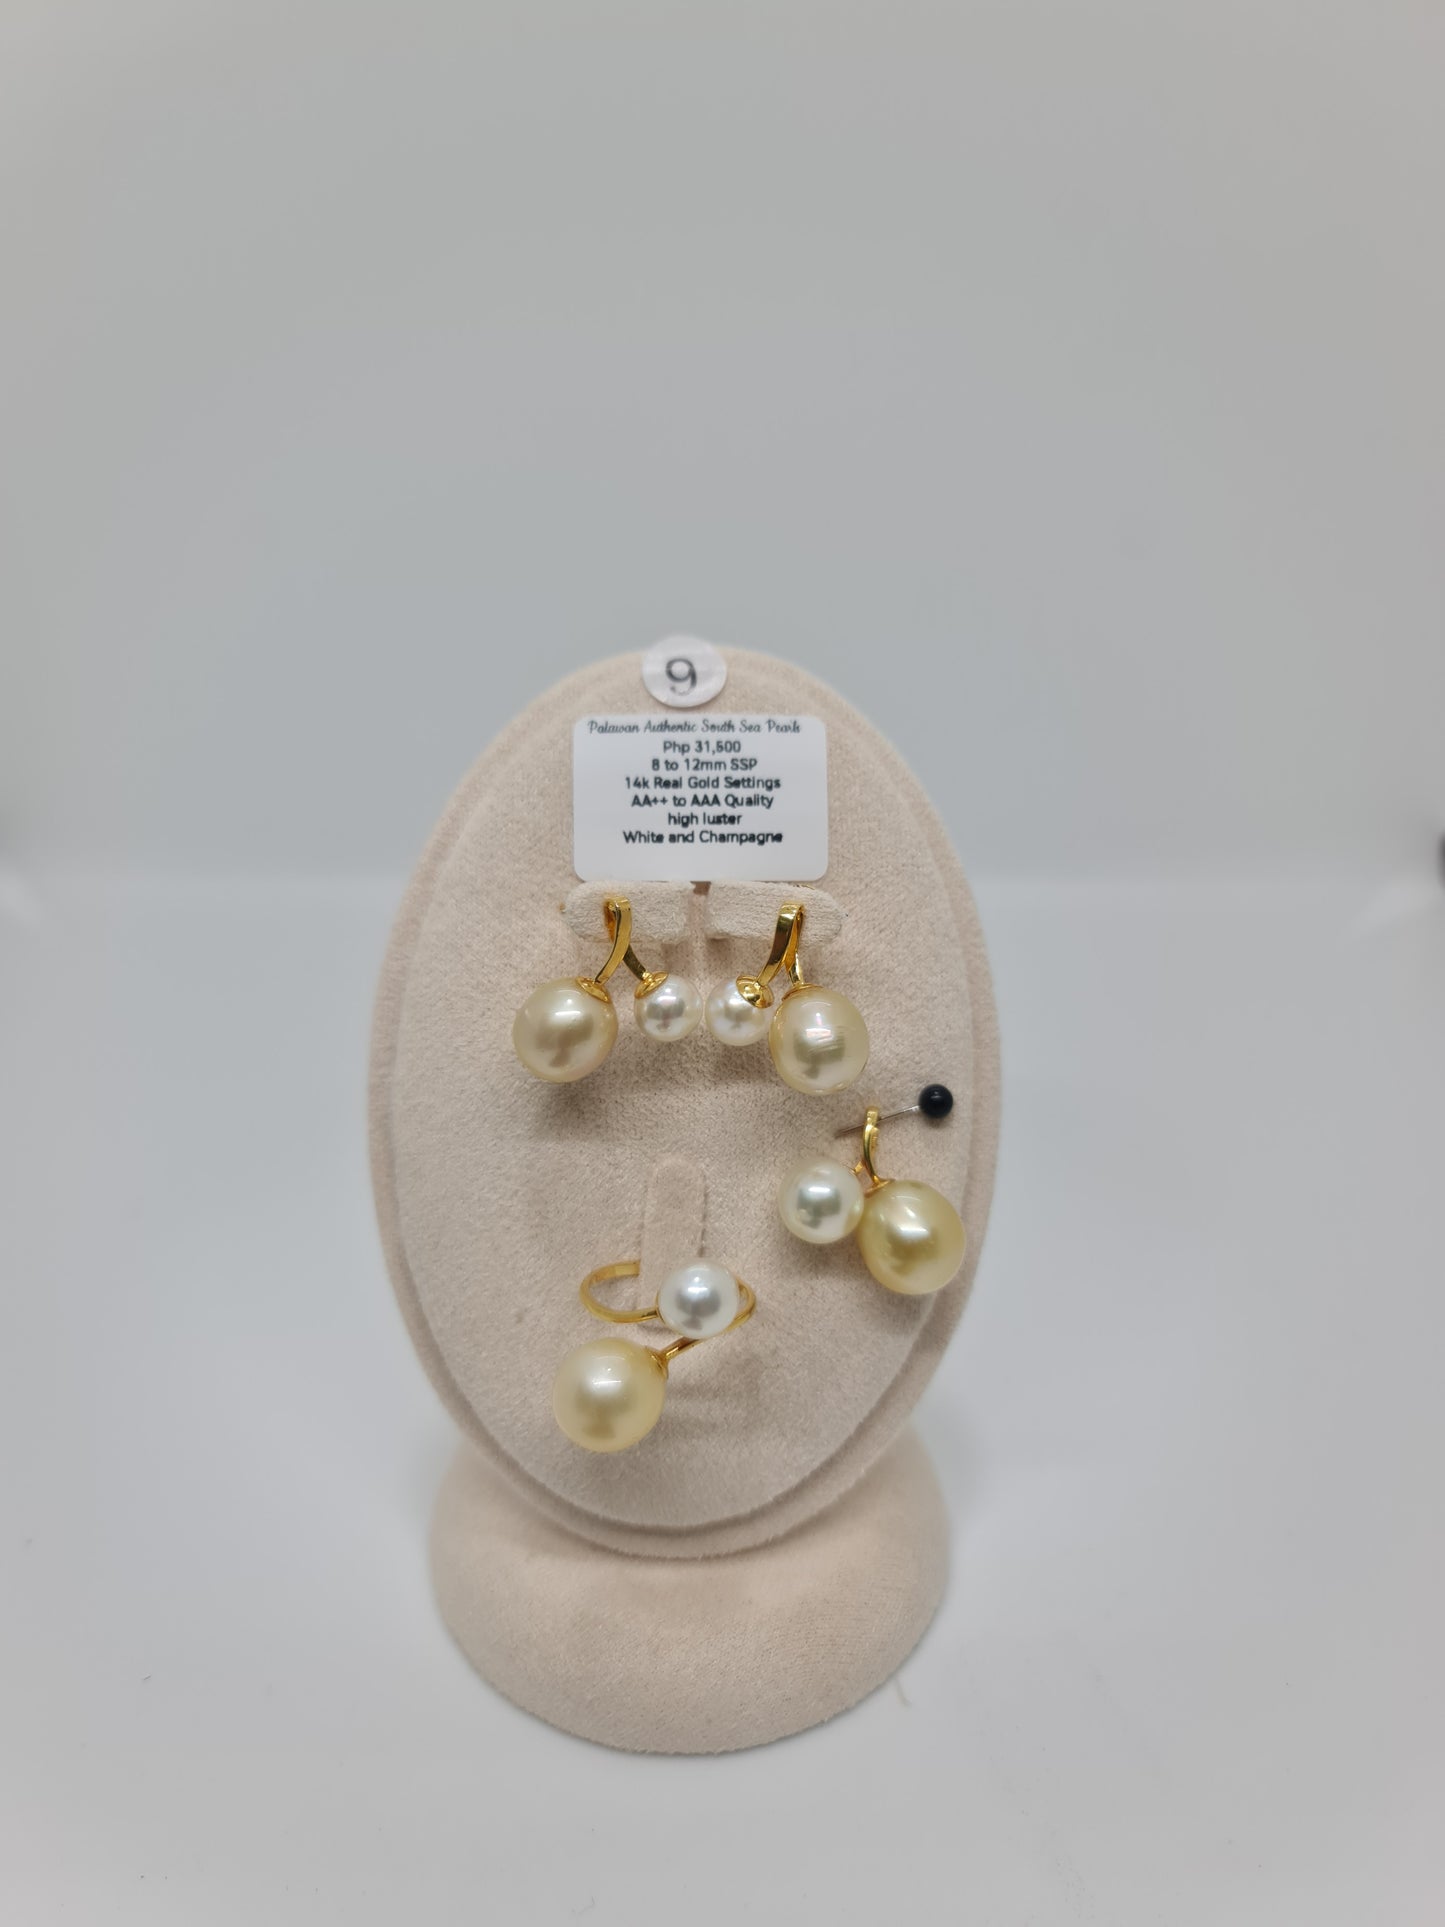 8mm to 12mm White & Champagne South Sea Pearls Set in 14K Gold